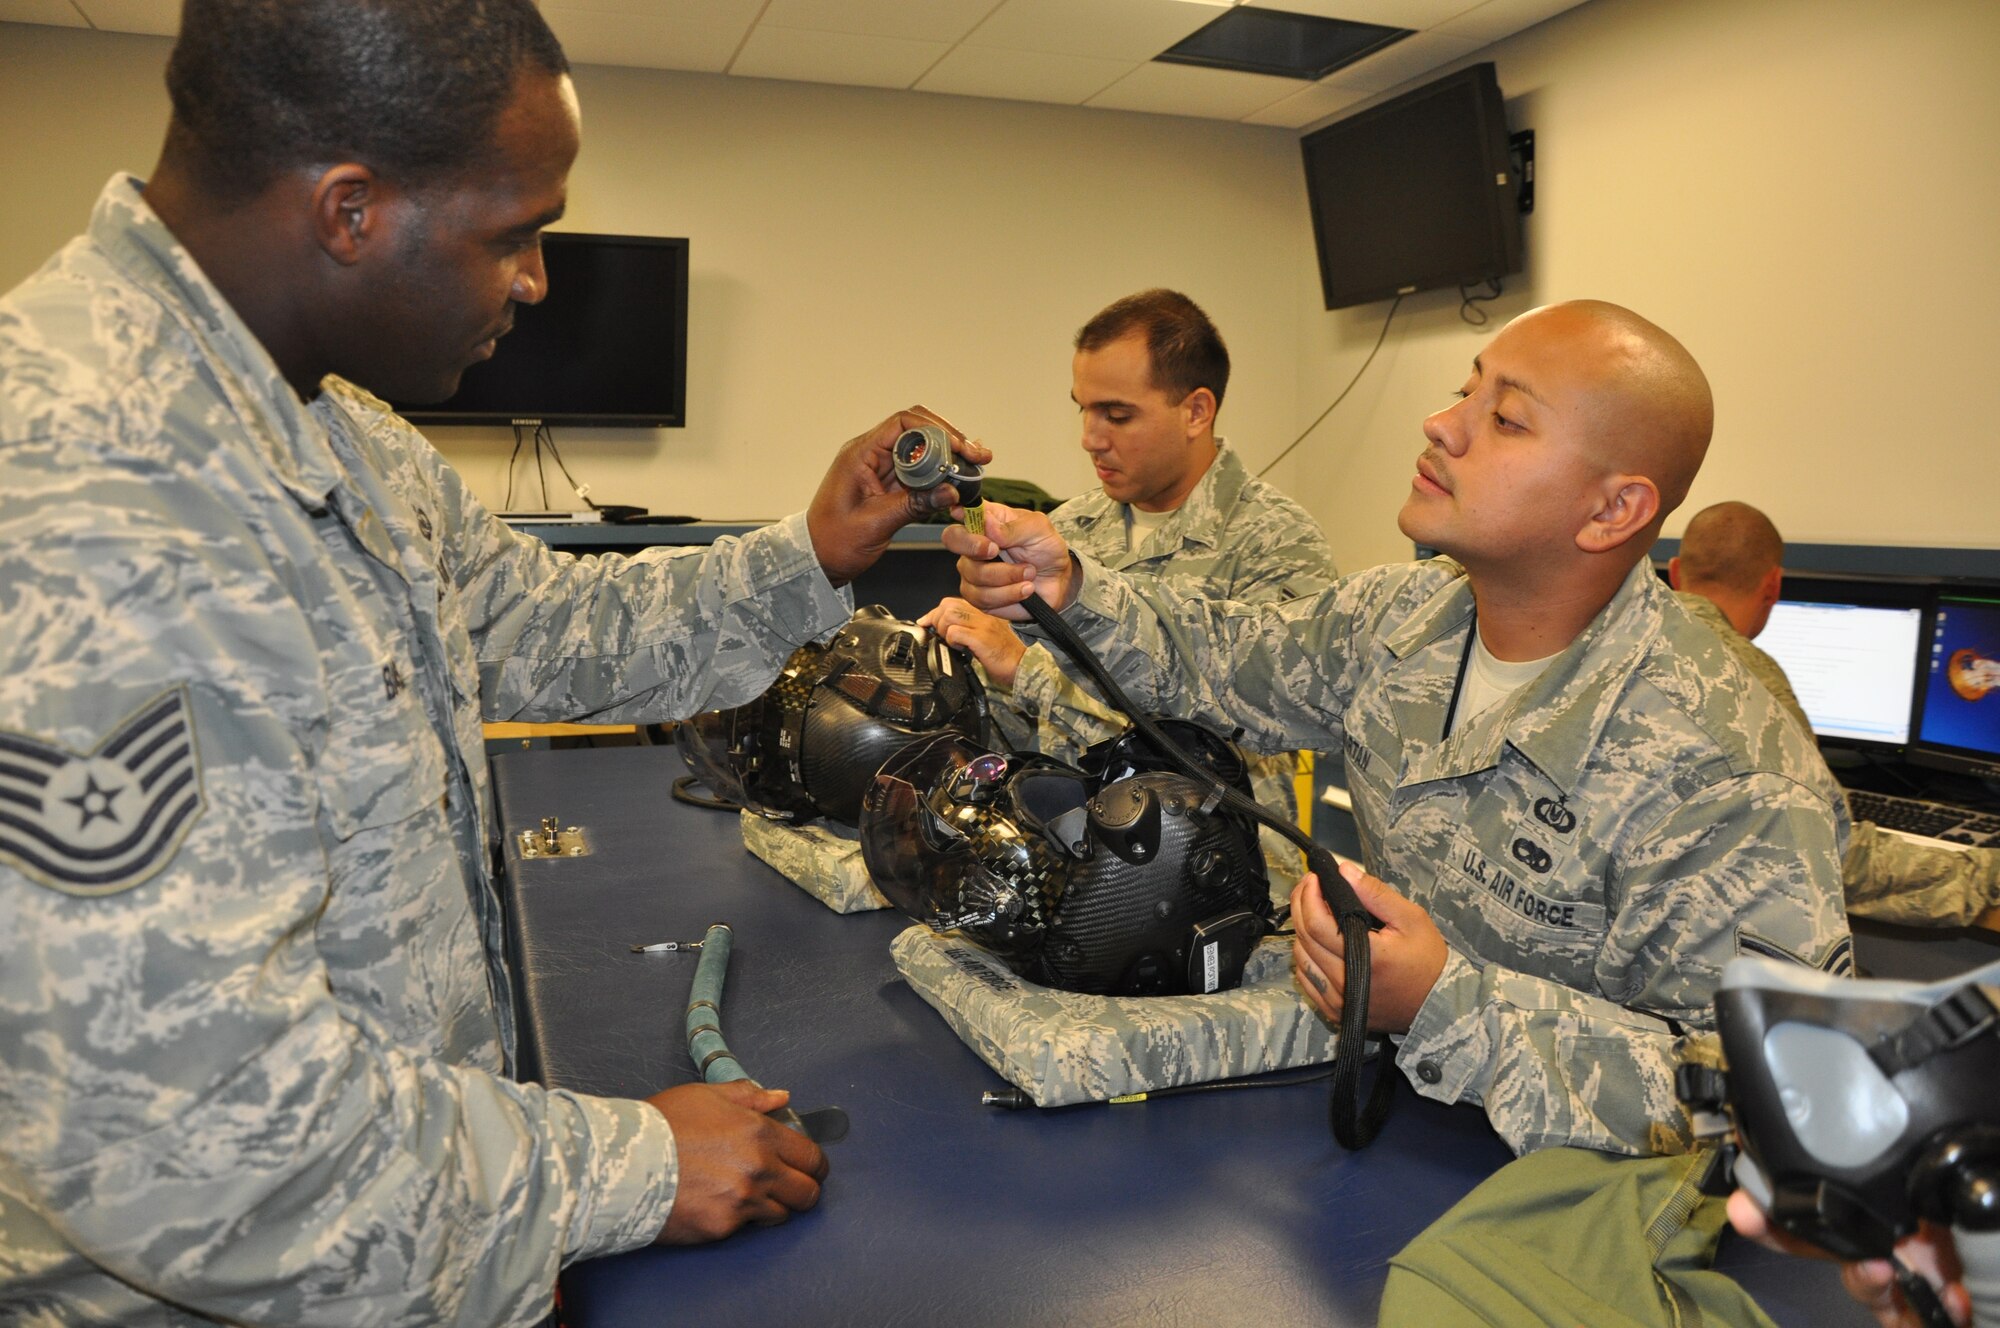 Tech. Sgt. Andre Baskin (left) and Tech. Sgt. Lemuel Velazquez (right), inspect the optical cable of the F-35 Lightning II helmet June 24, 2013 at the 33rd Fighter Wing, Eglin AFB, Fla. The members are part of the 33rd Operations Support Squadron Aircrew Flight Equipment Flight and ensure the pilots have well-maintained gear, which provides enhanced situational awareness, targeting information and symbology capabilities displayed on the visor of the helmet. (U.S. Air Force photo by Maj. Karen Roganov)